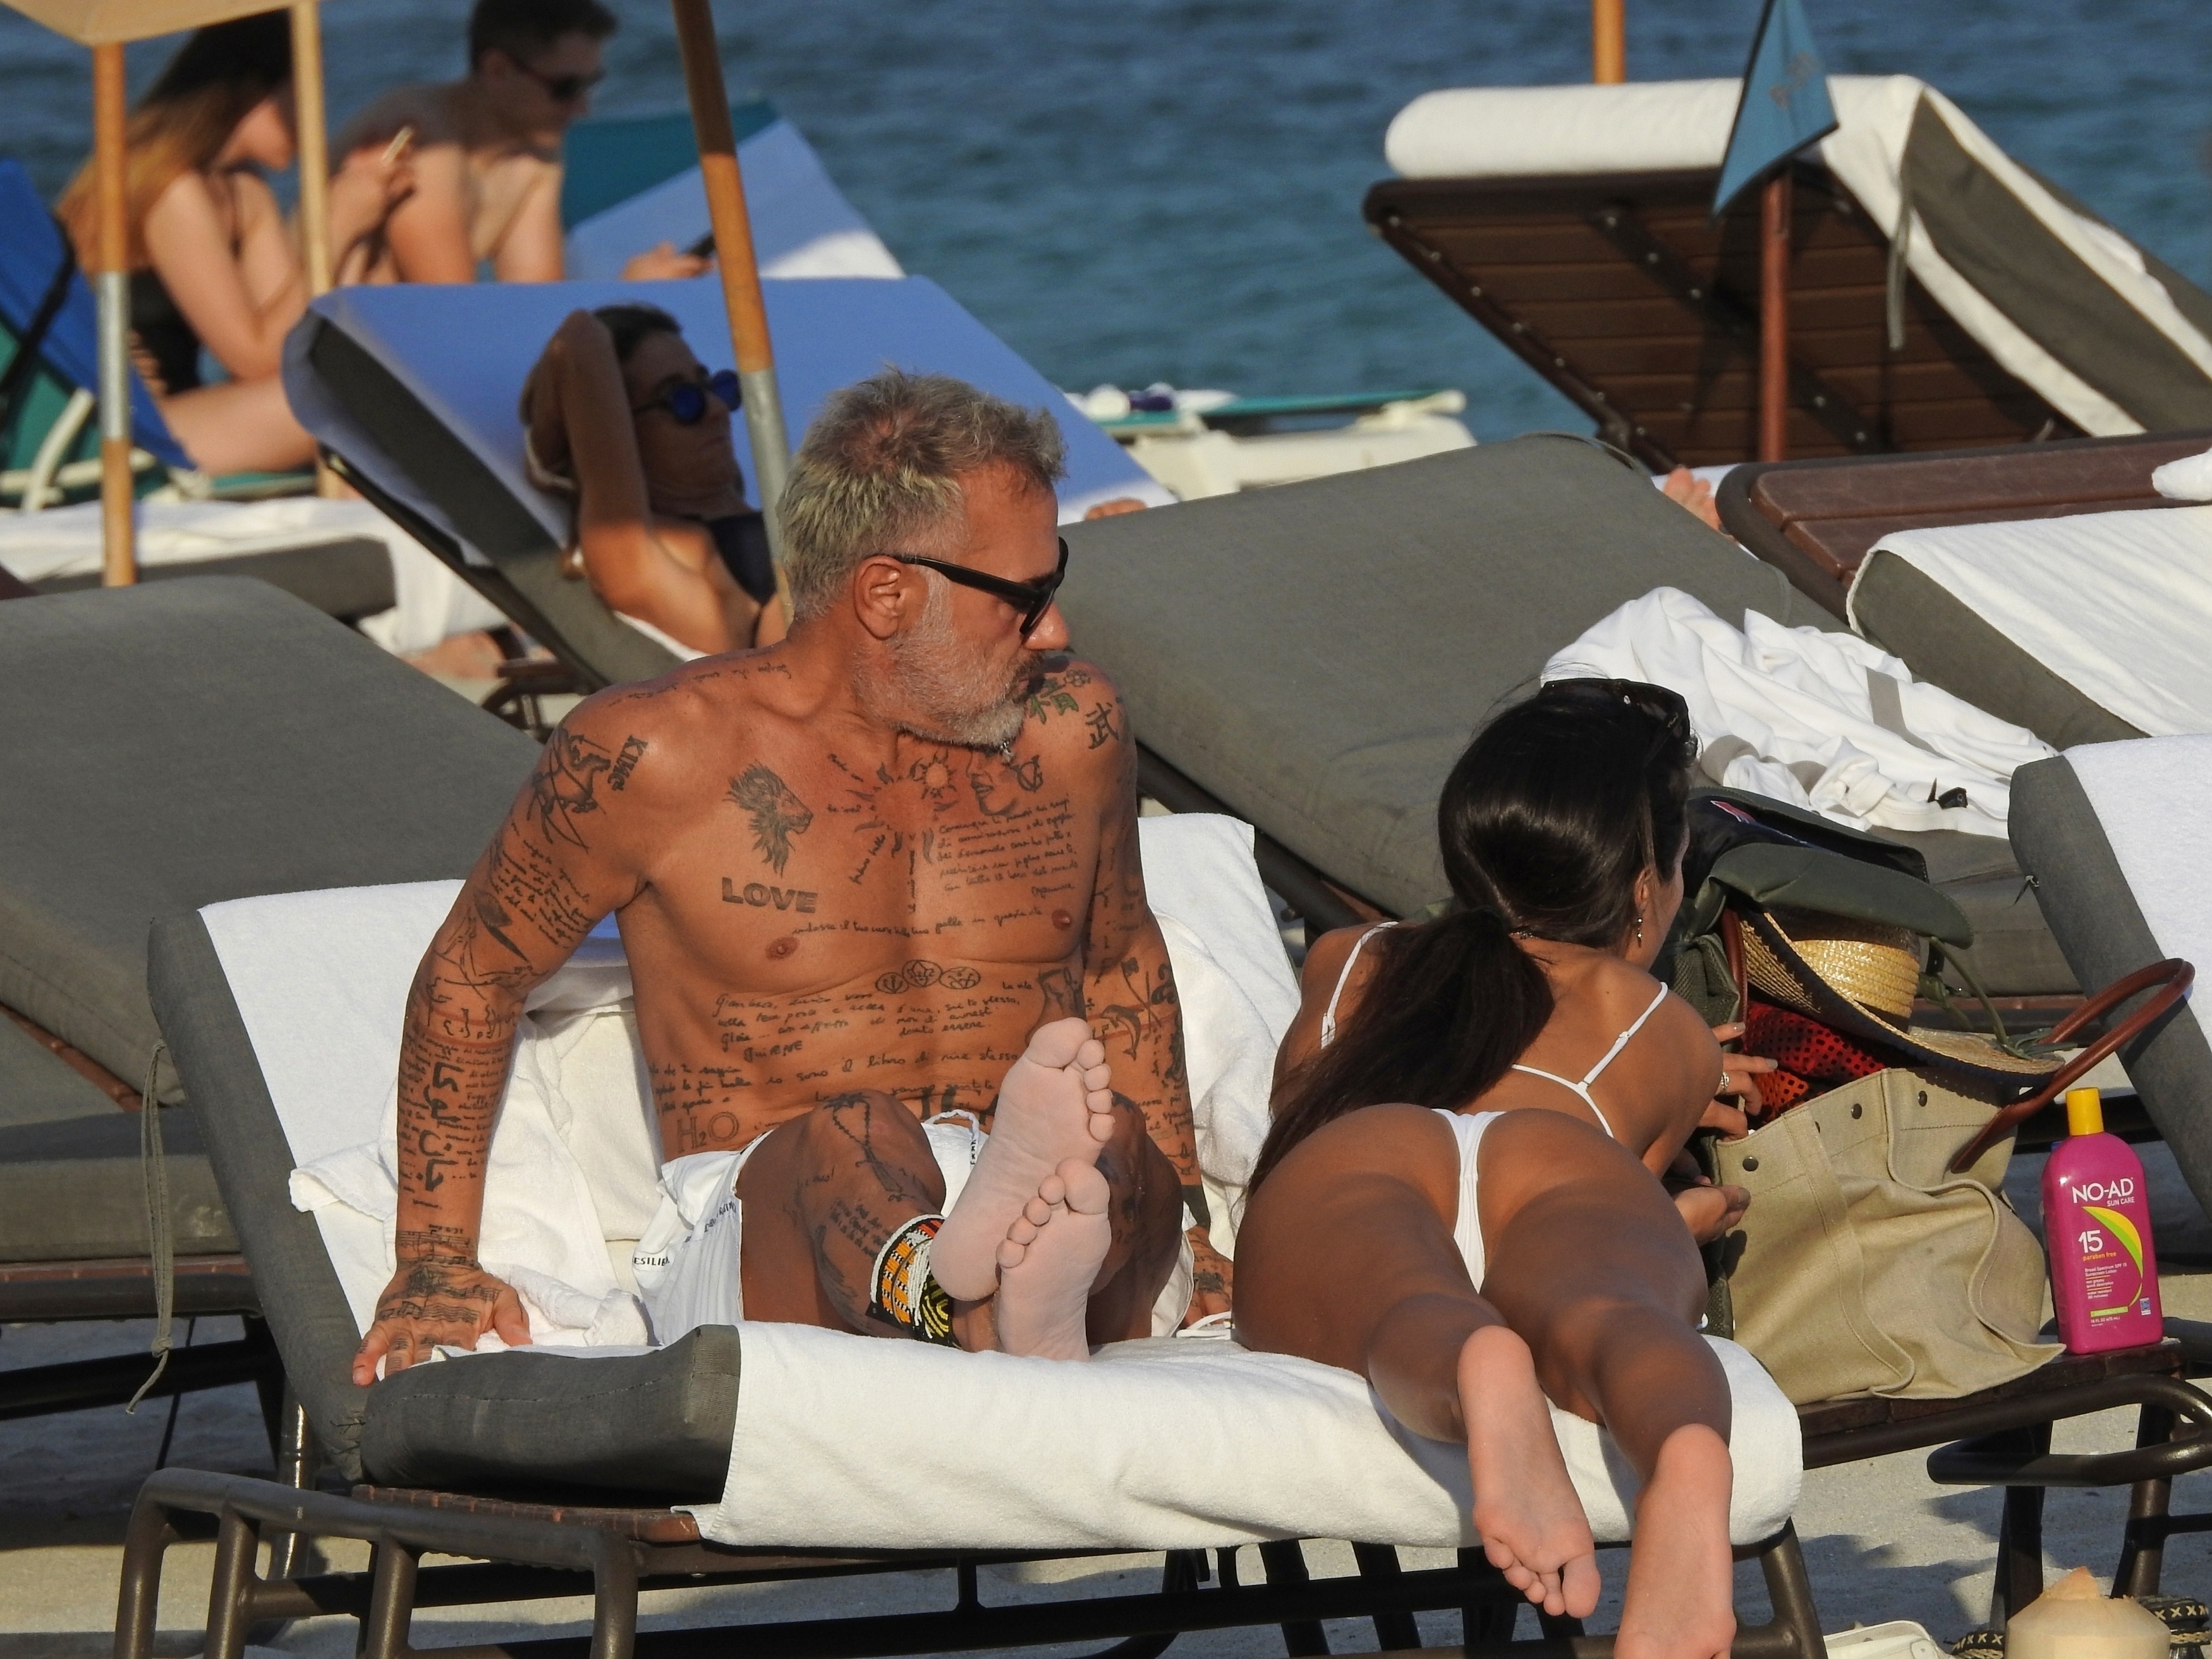 Sharon Fonseca hangs out with some beefy, inked-up grandpa (possibly a majo...